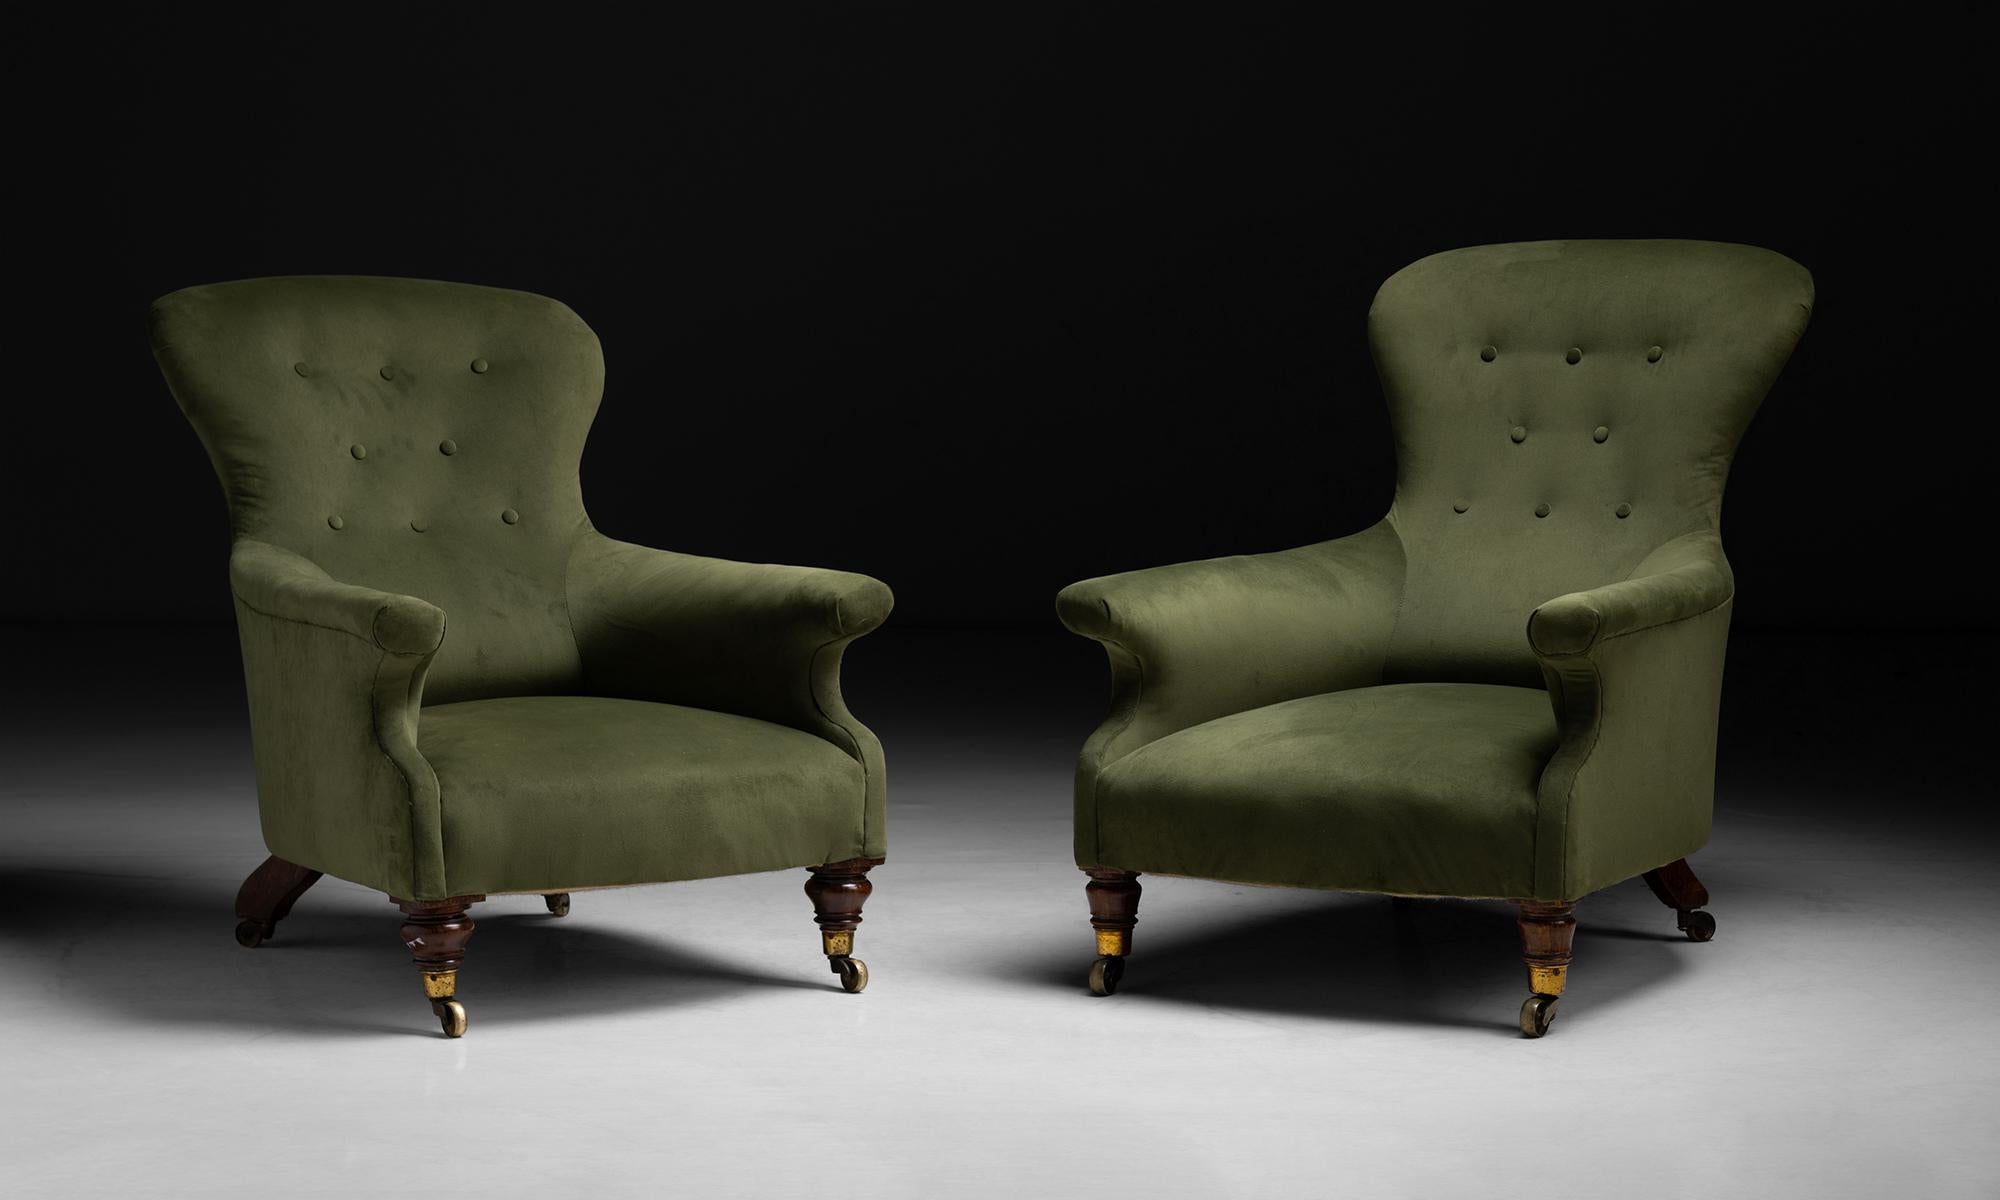 Pair of Library Chairs in Velvet, England, circa 1910

Low, angled form, newly upholstered in velvet, on turned mahogany legs with brass castors.

Measures 27.5”w x 32”d x 33”h x 12”seat / 28”w x 35”d x 41”h x 13”seat.